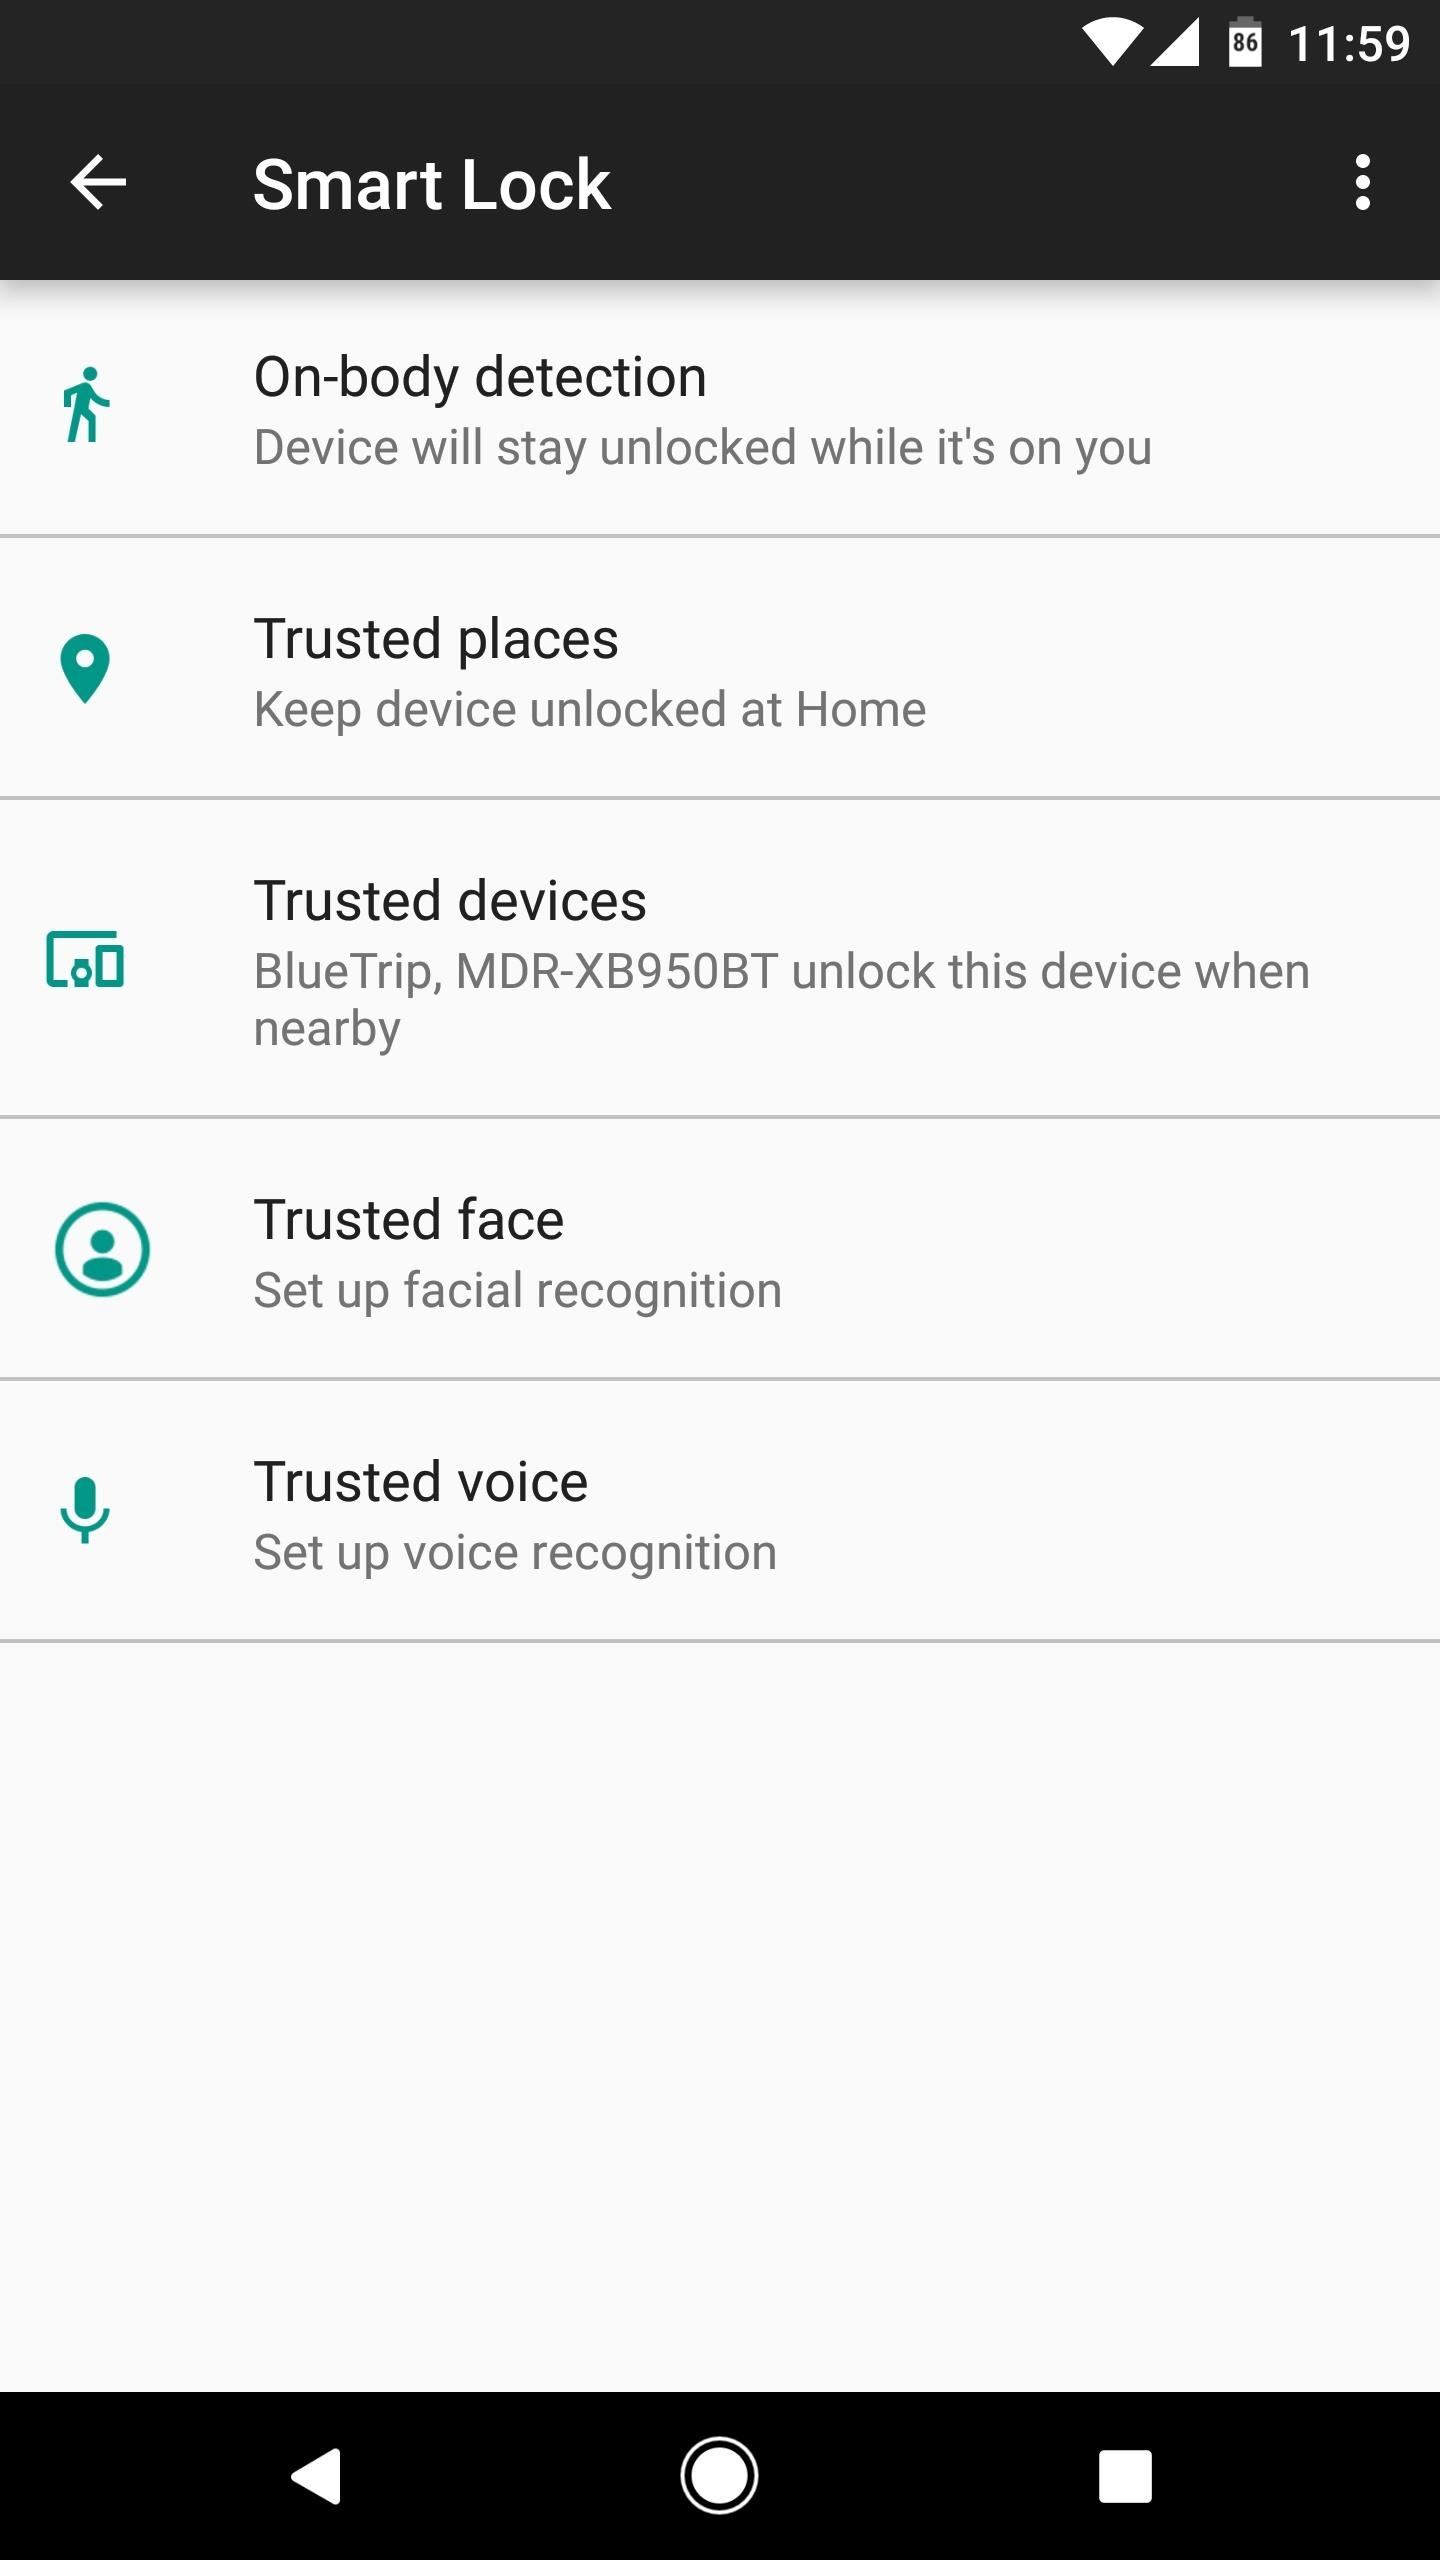 Lock Down Bluetooth, Force HTTPS & Adjust Other Options to Secure Your Android Device